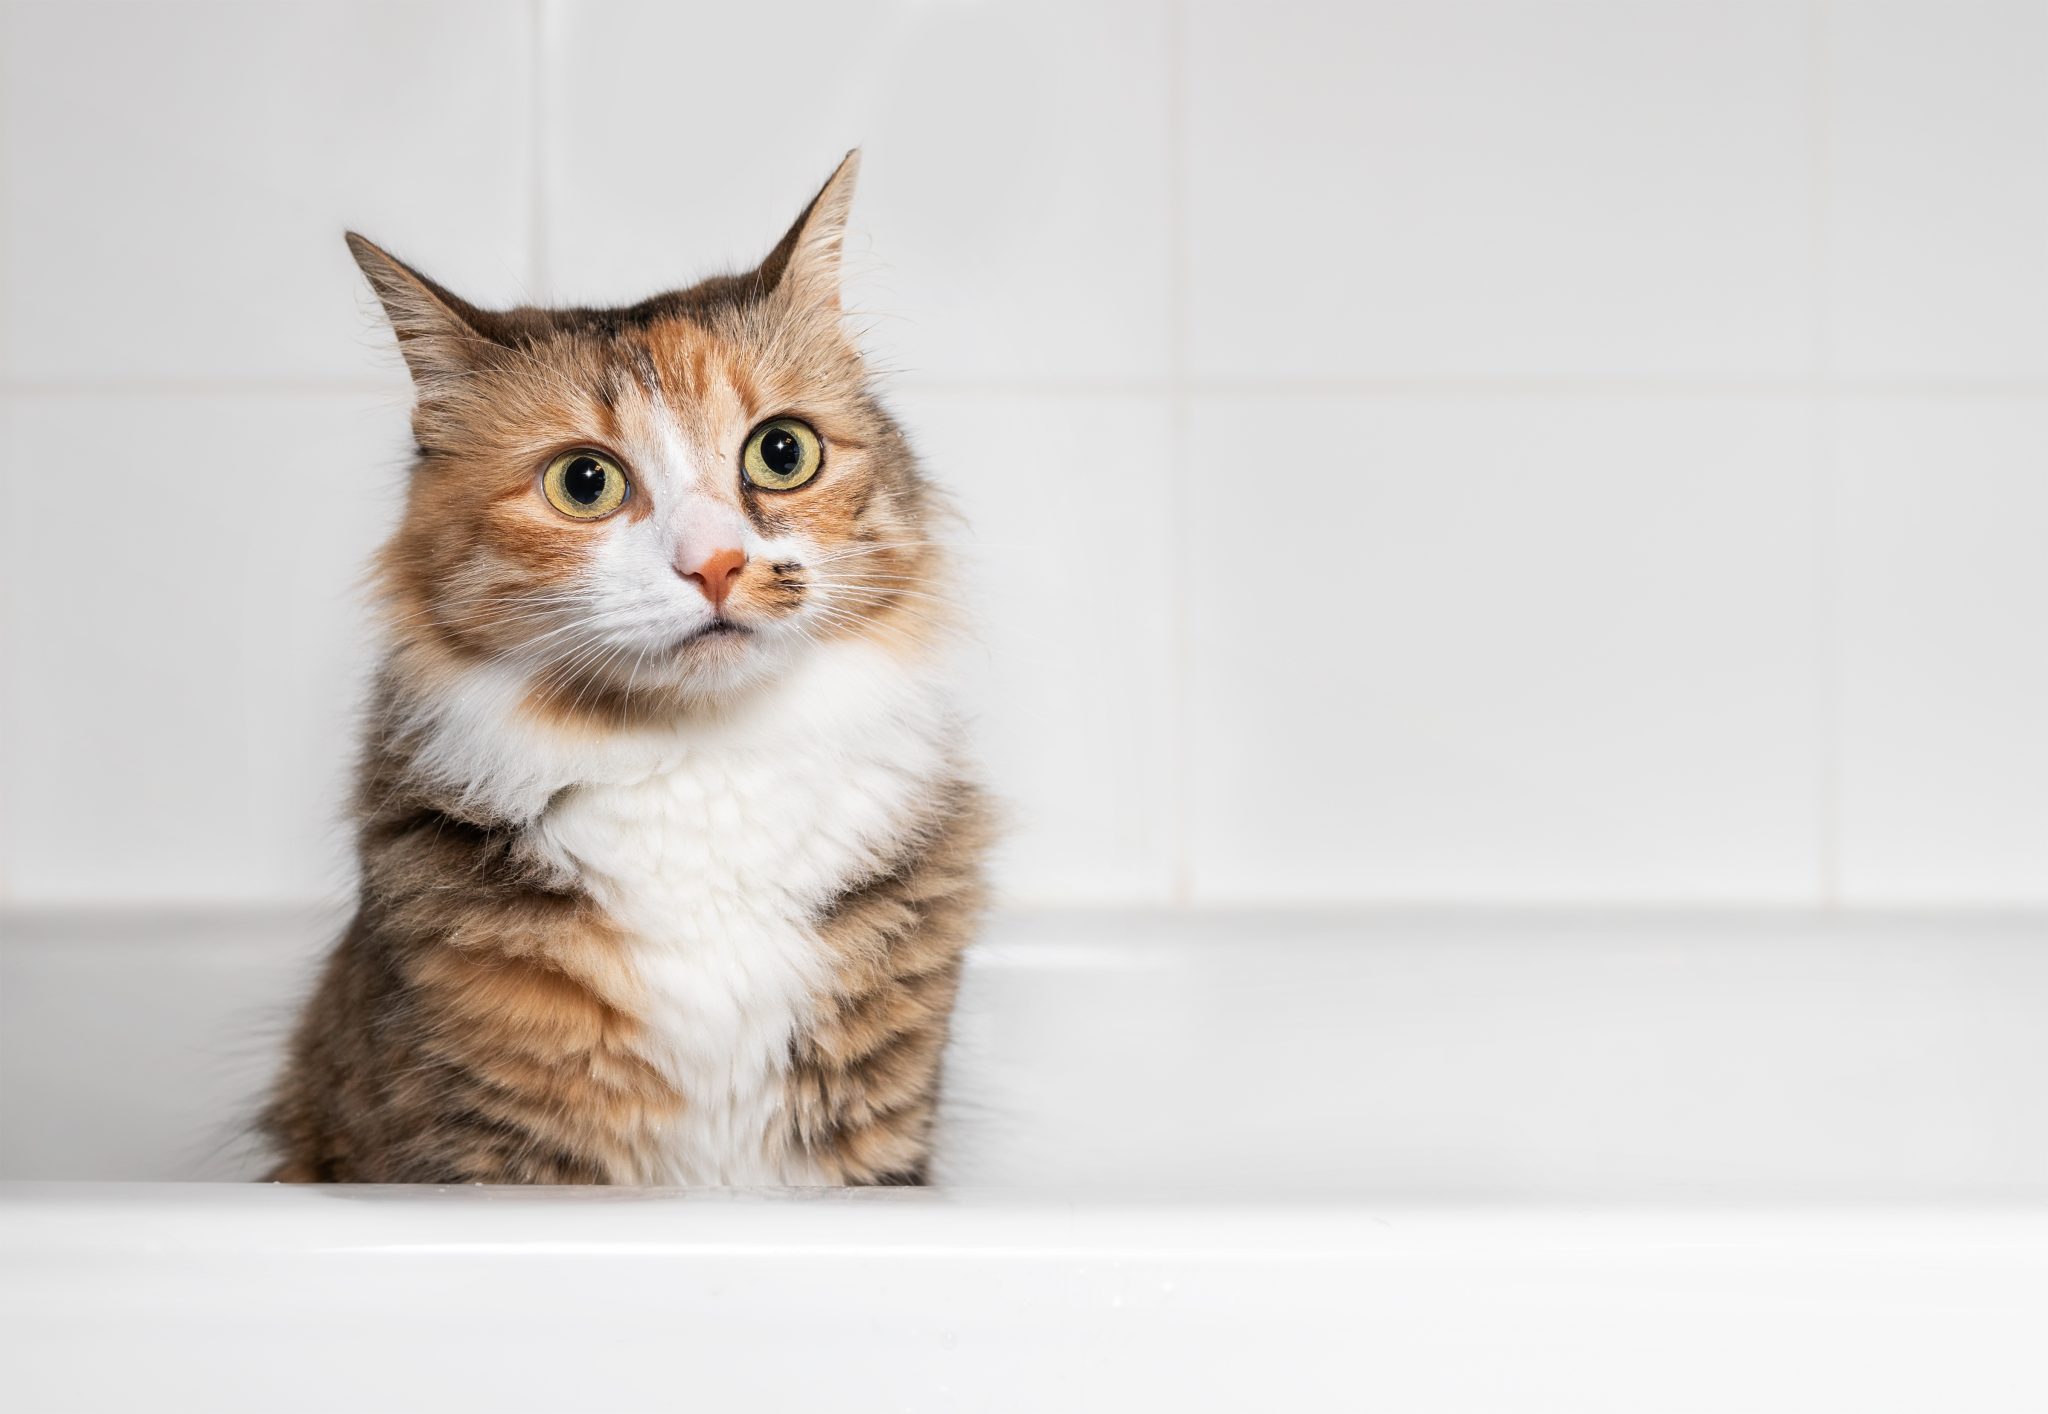 Cat sitting in bathtub after playing with water, front view